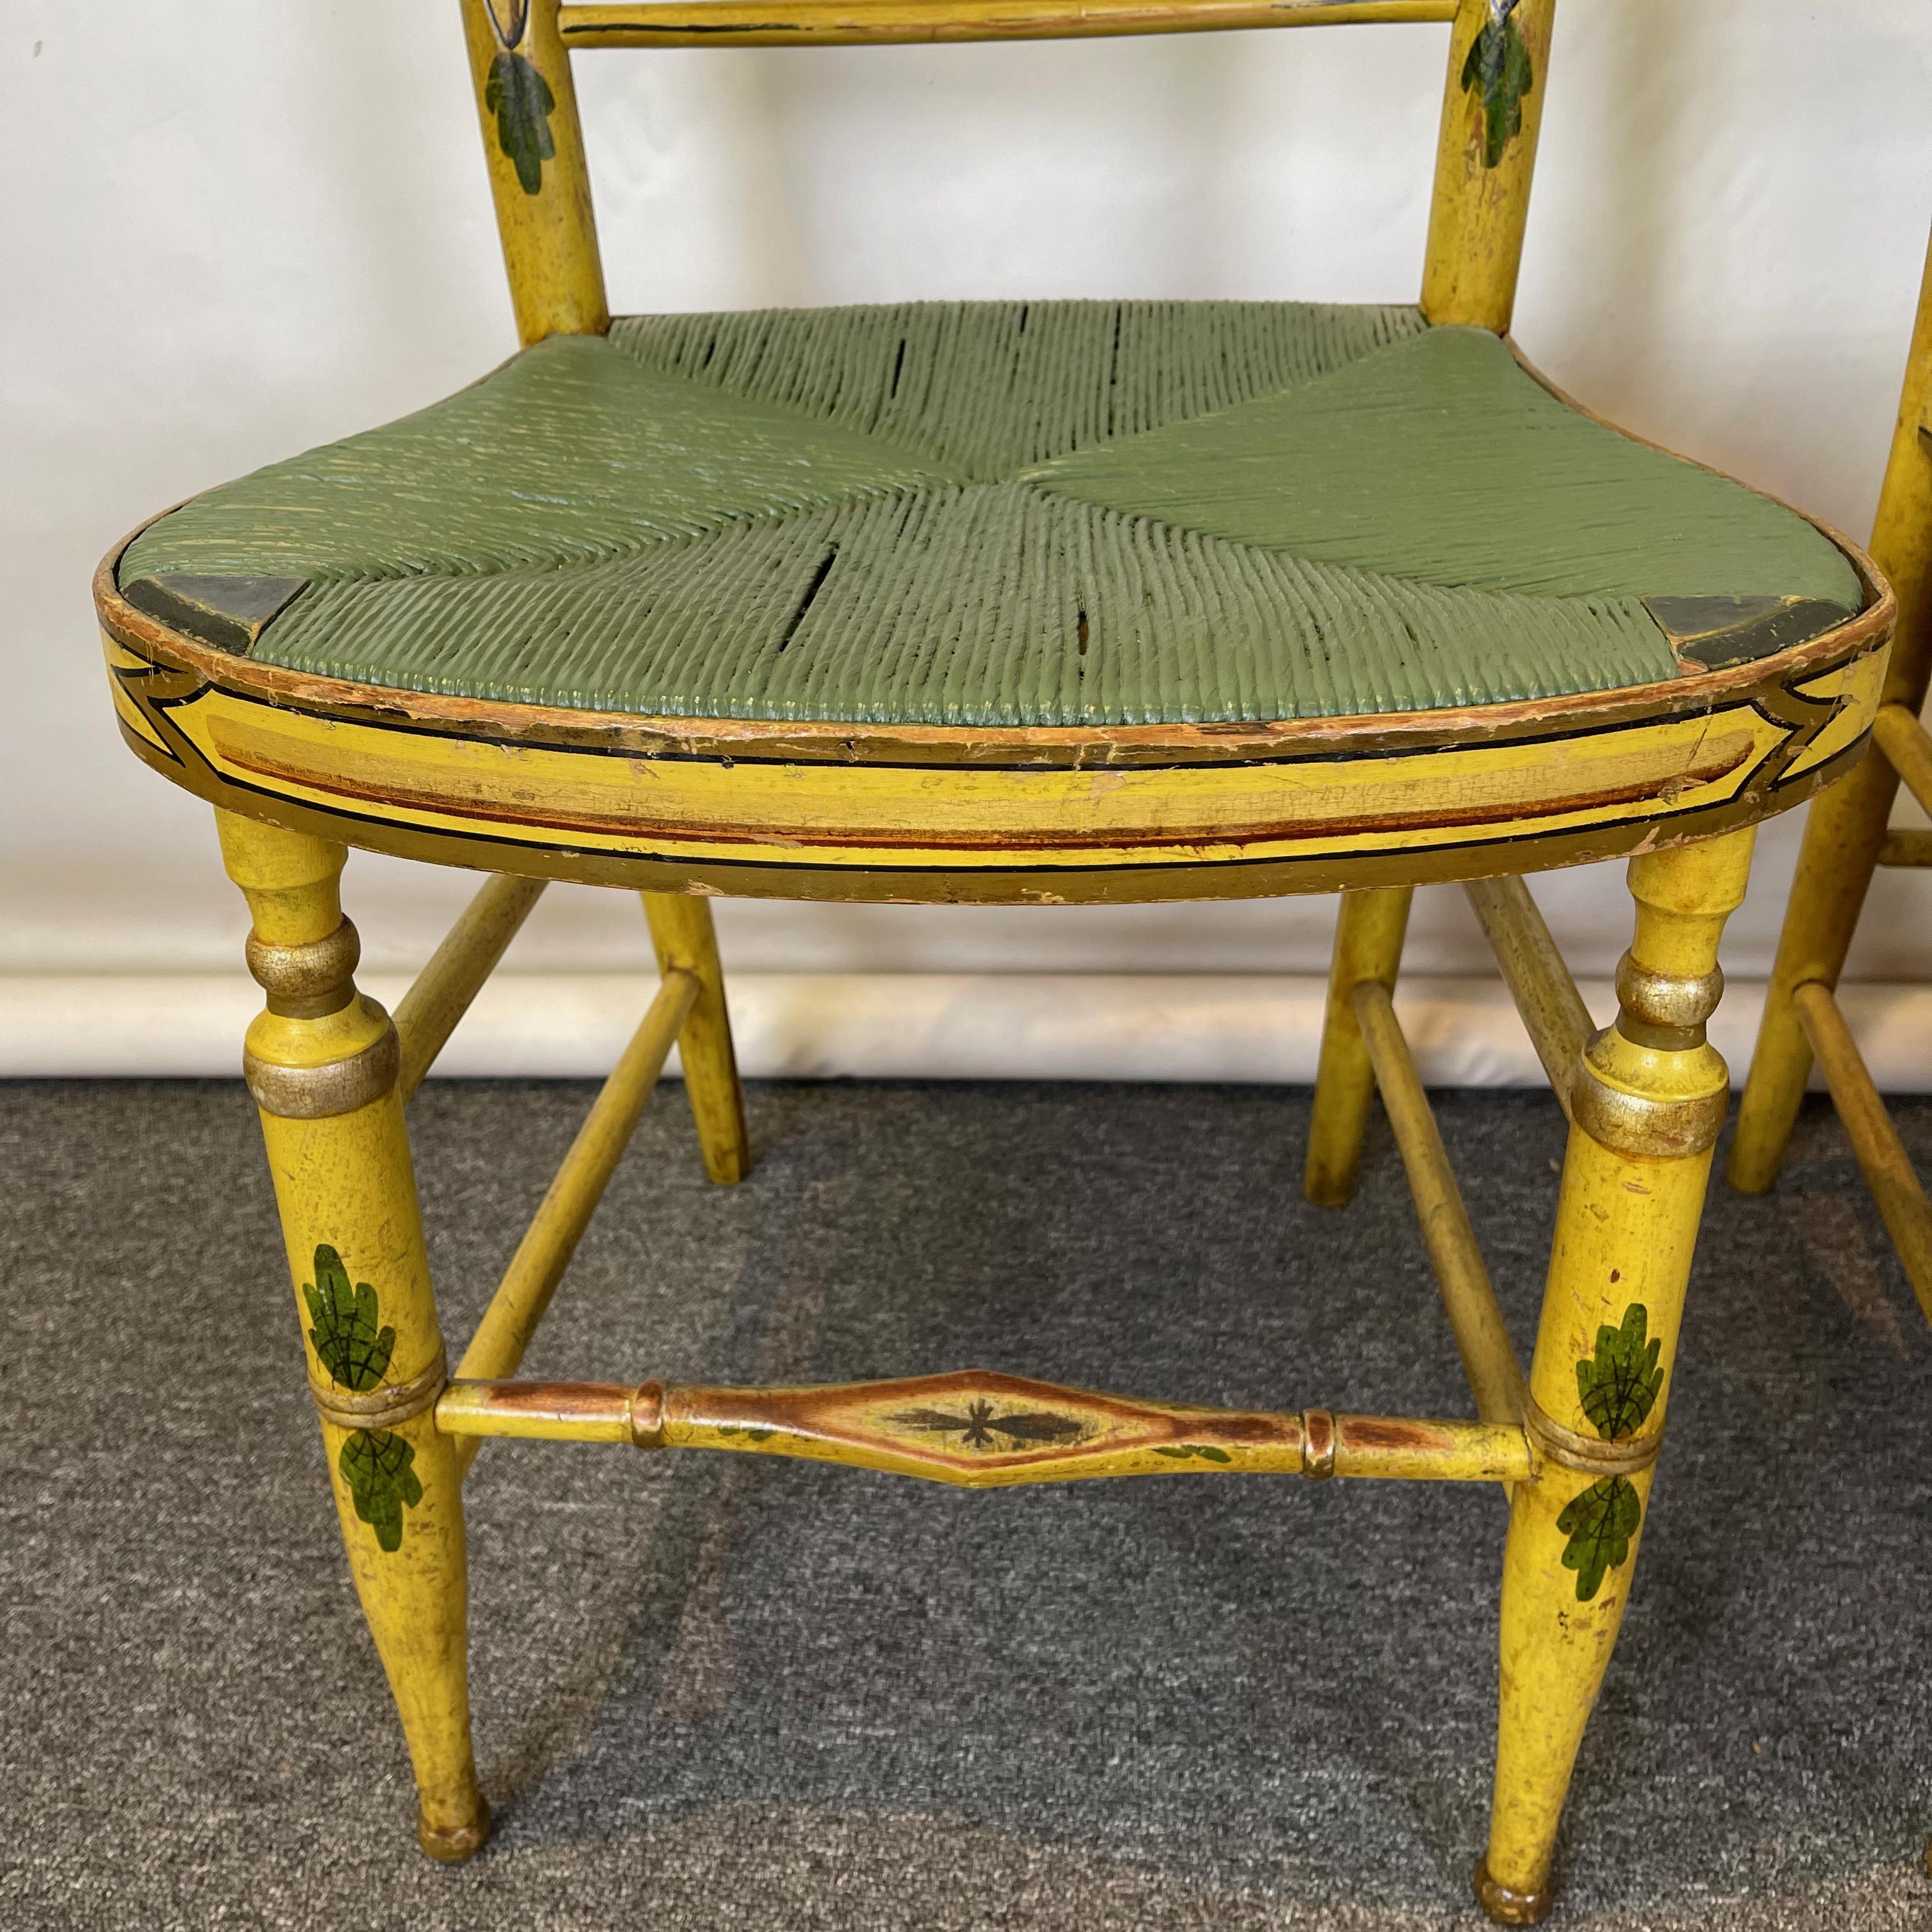 Set of Four Early 19th Century American Paint Decorated Fancy Chairs 2